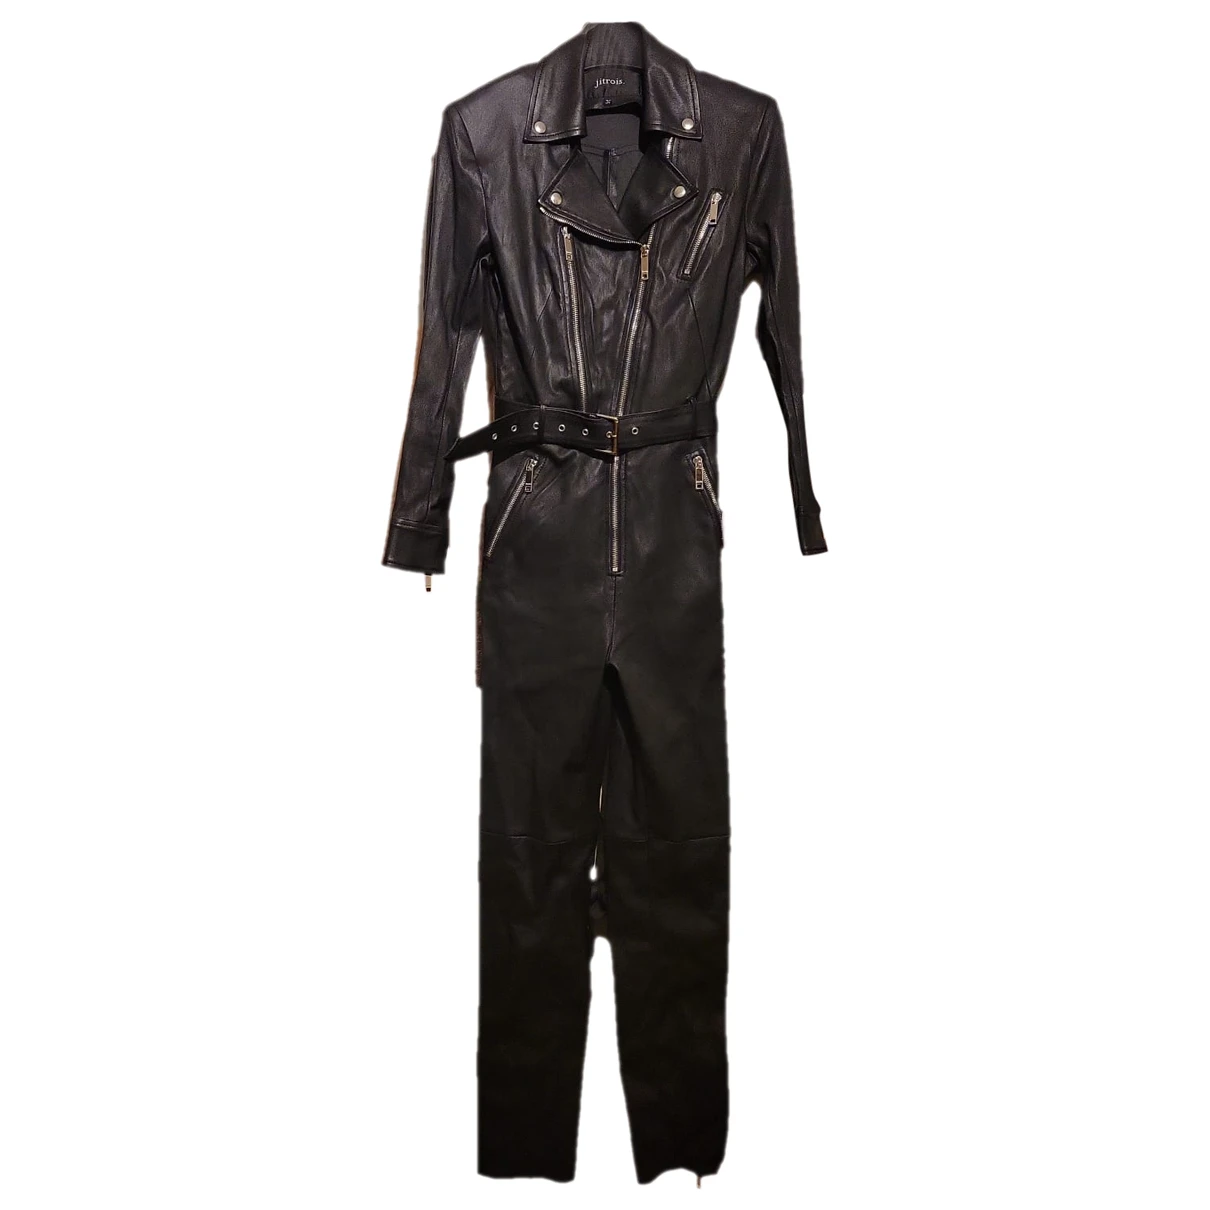 clothing Jitrois jumpsuits for Female Leather 8 UK. Used condition